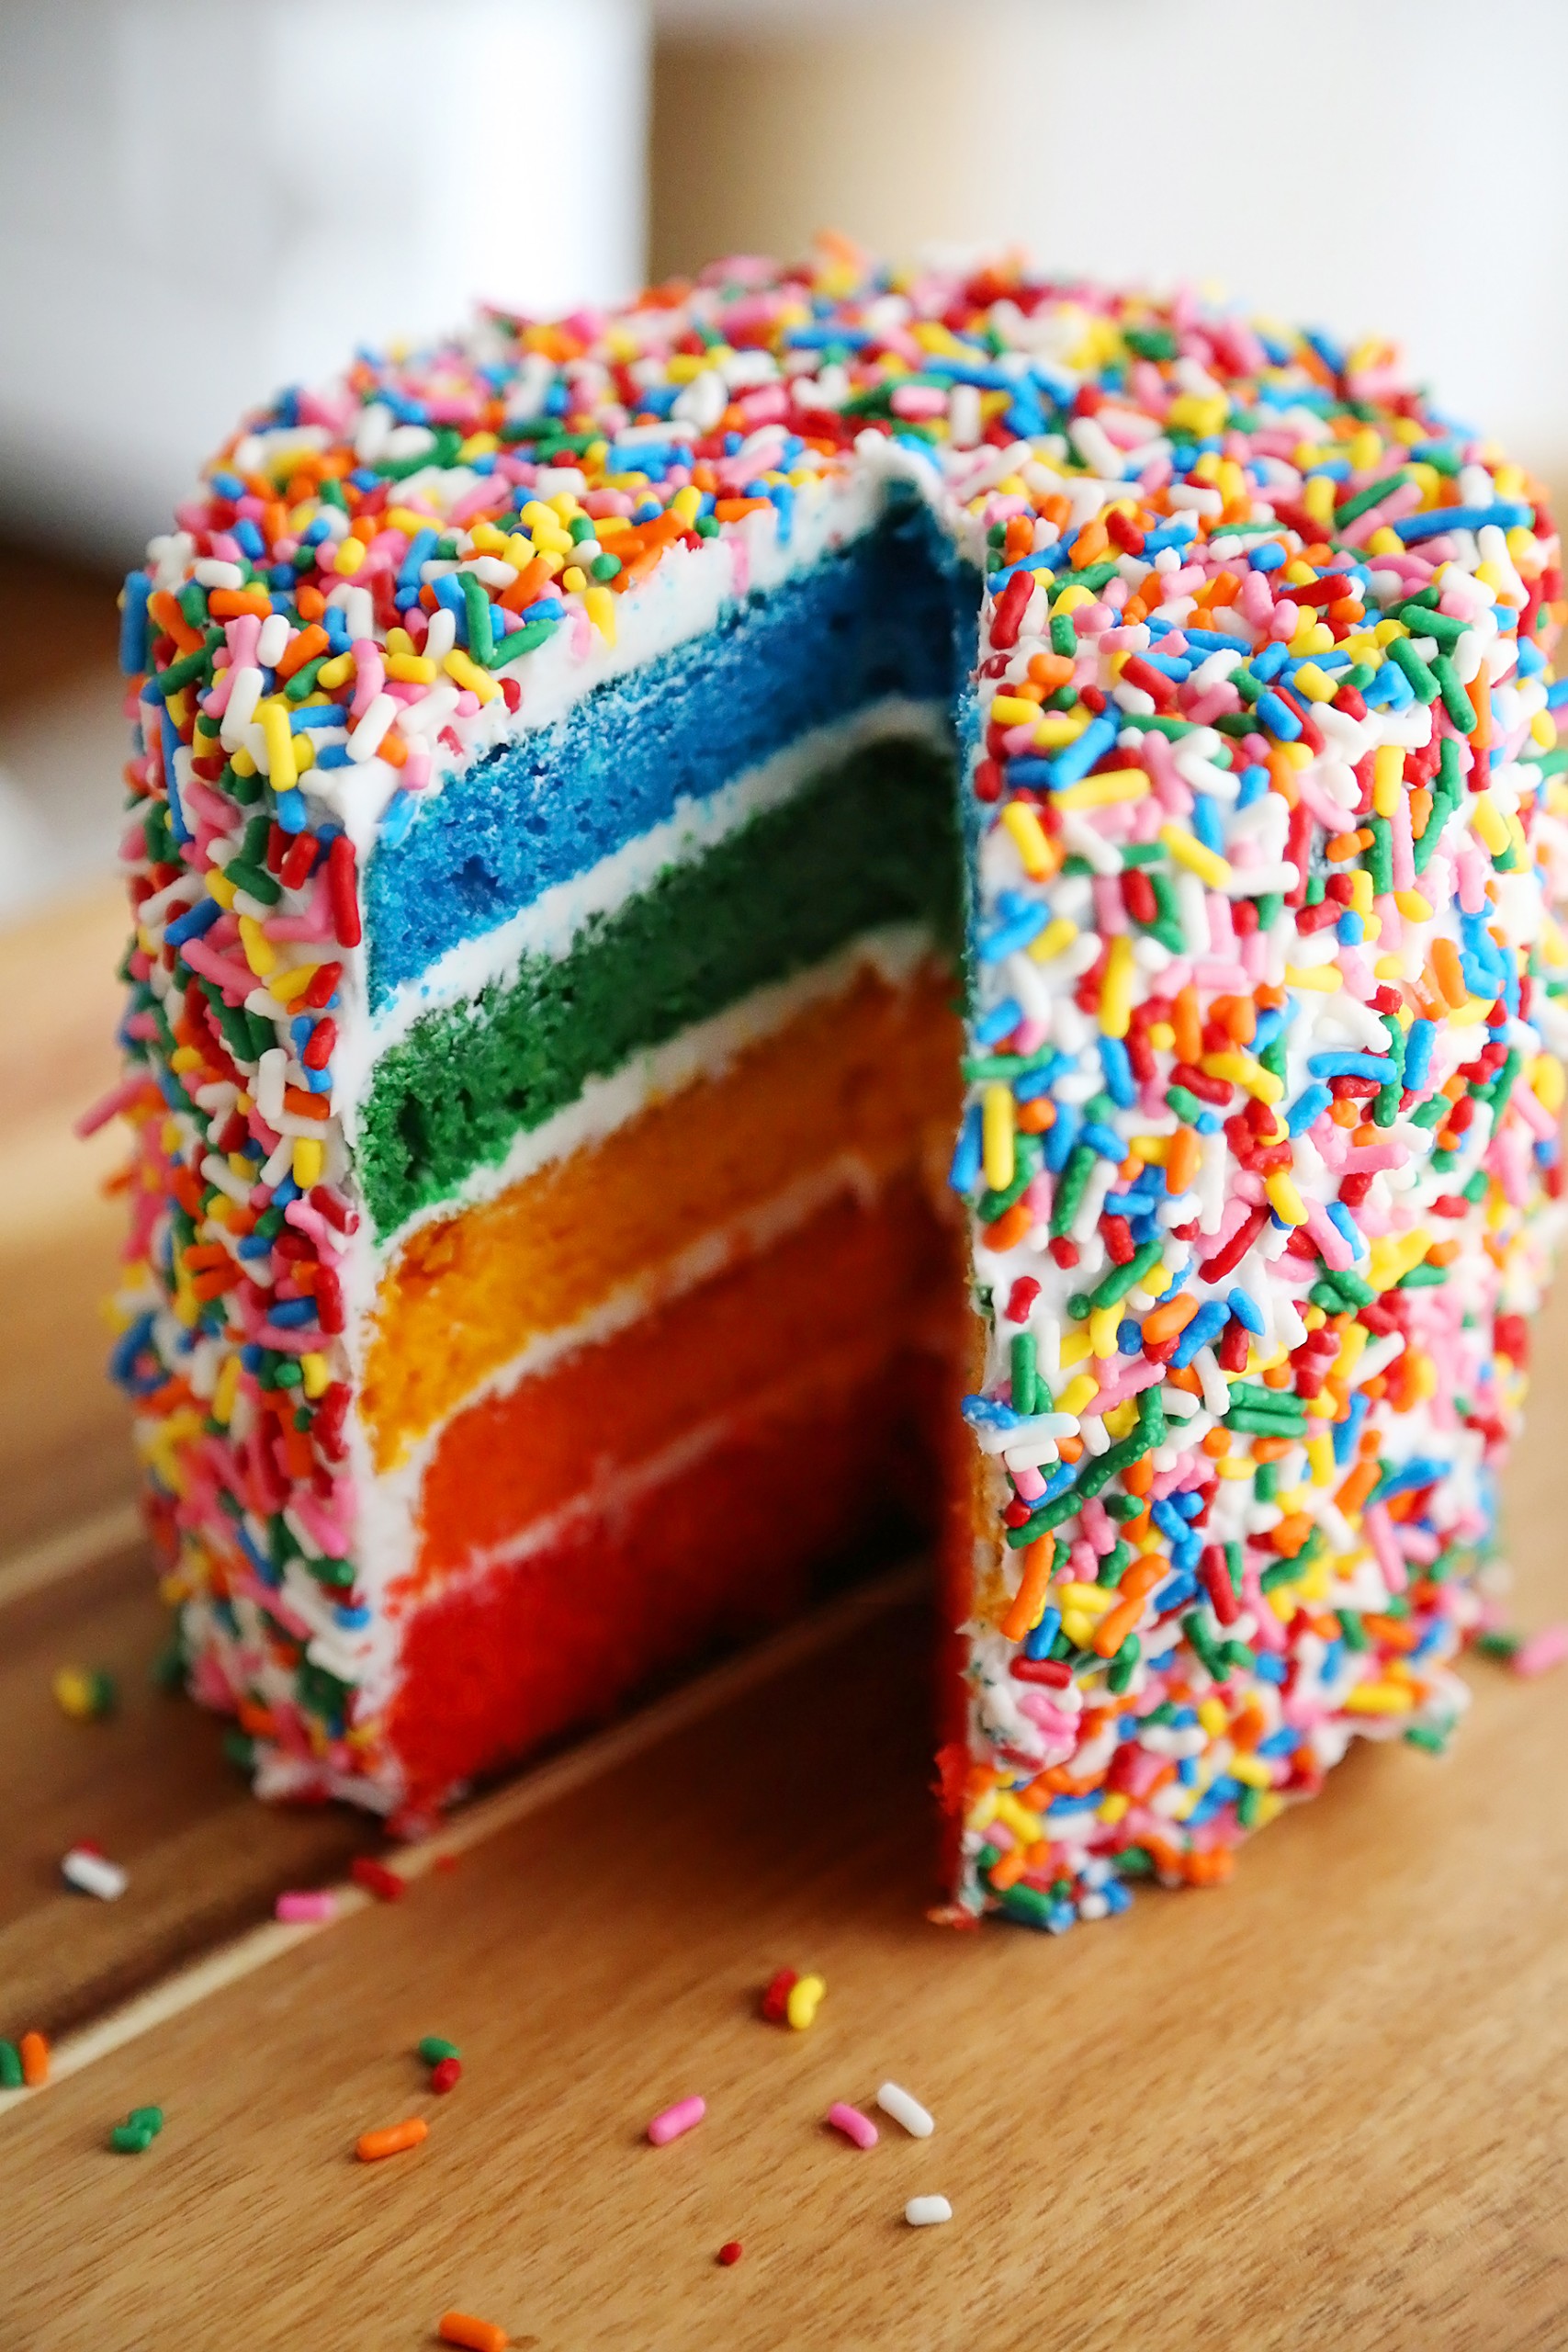 http://www.thecomfortofcooking.com/wp-content/uploads/2020/06/Easy_Rainbow_Cake-3-scaled.jpg